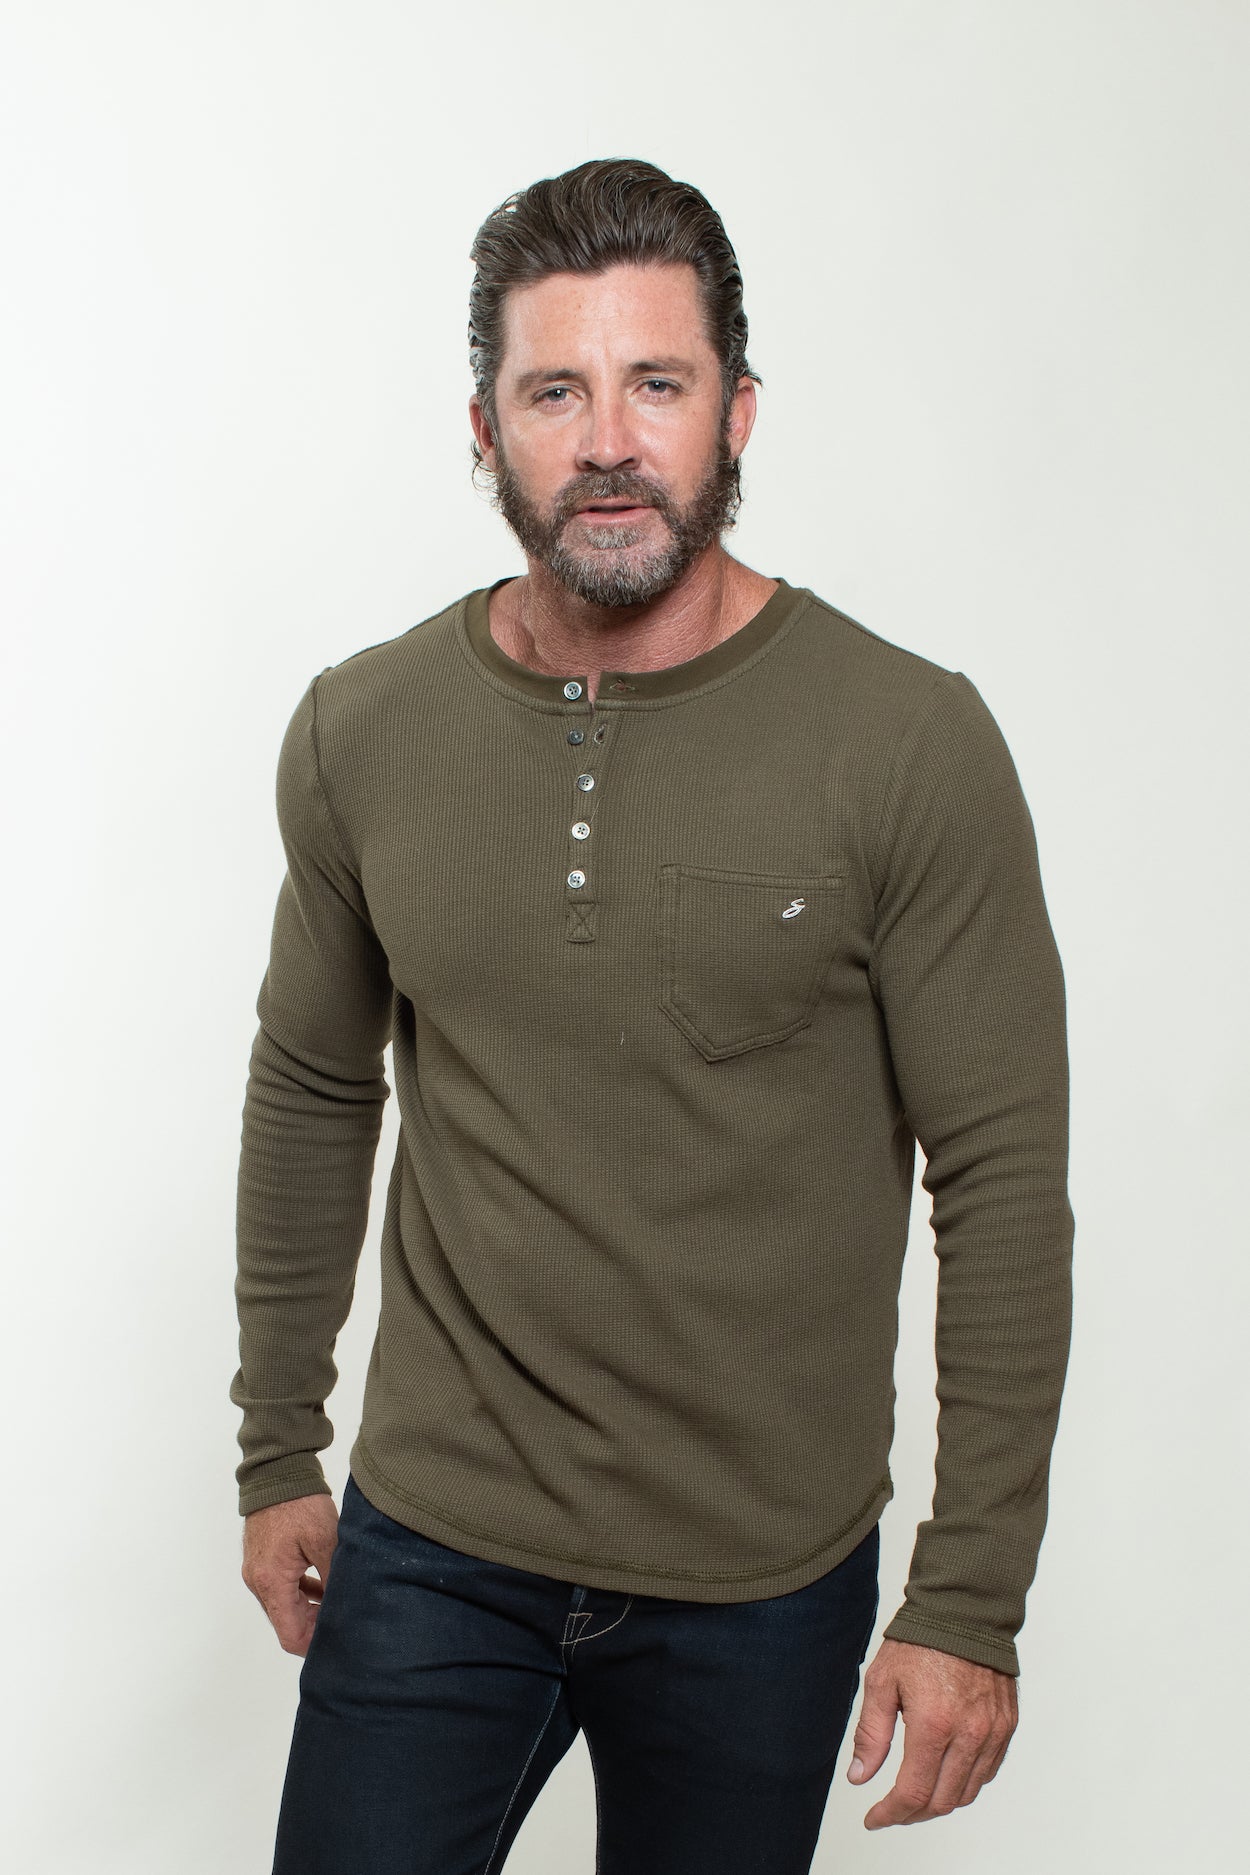 KNITTED HENLEY T-SHIRT IN MILITARY GREEN | Stitch's Jeans